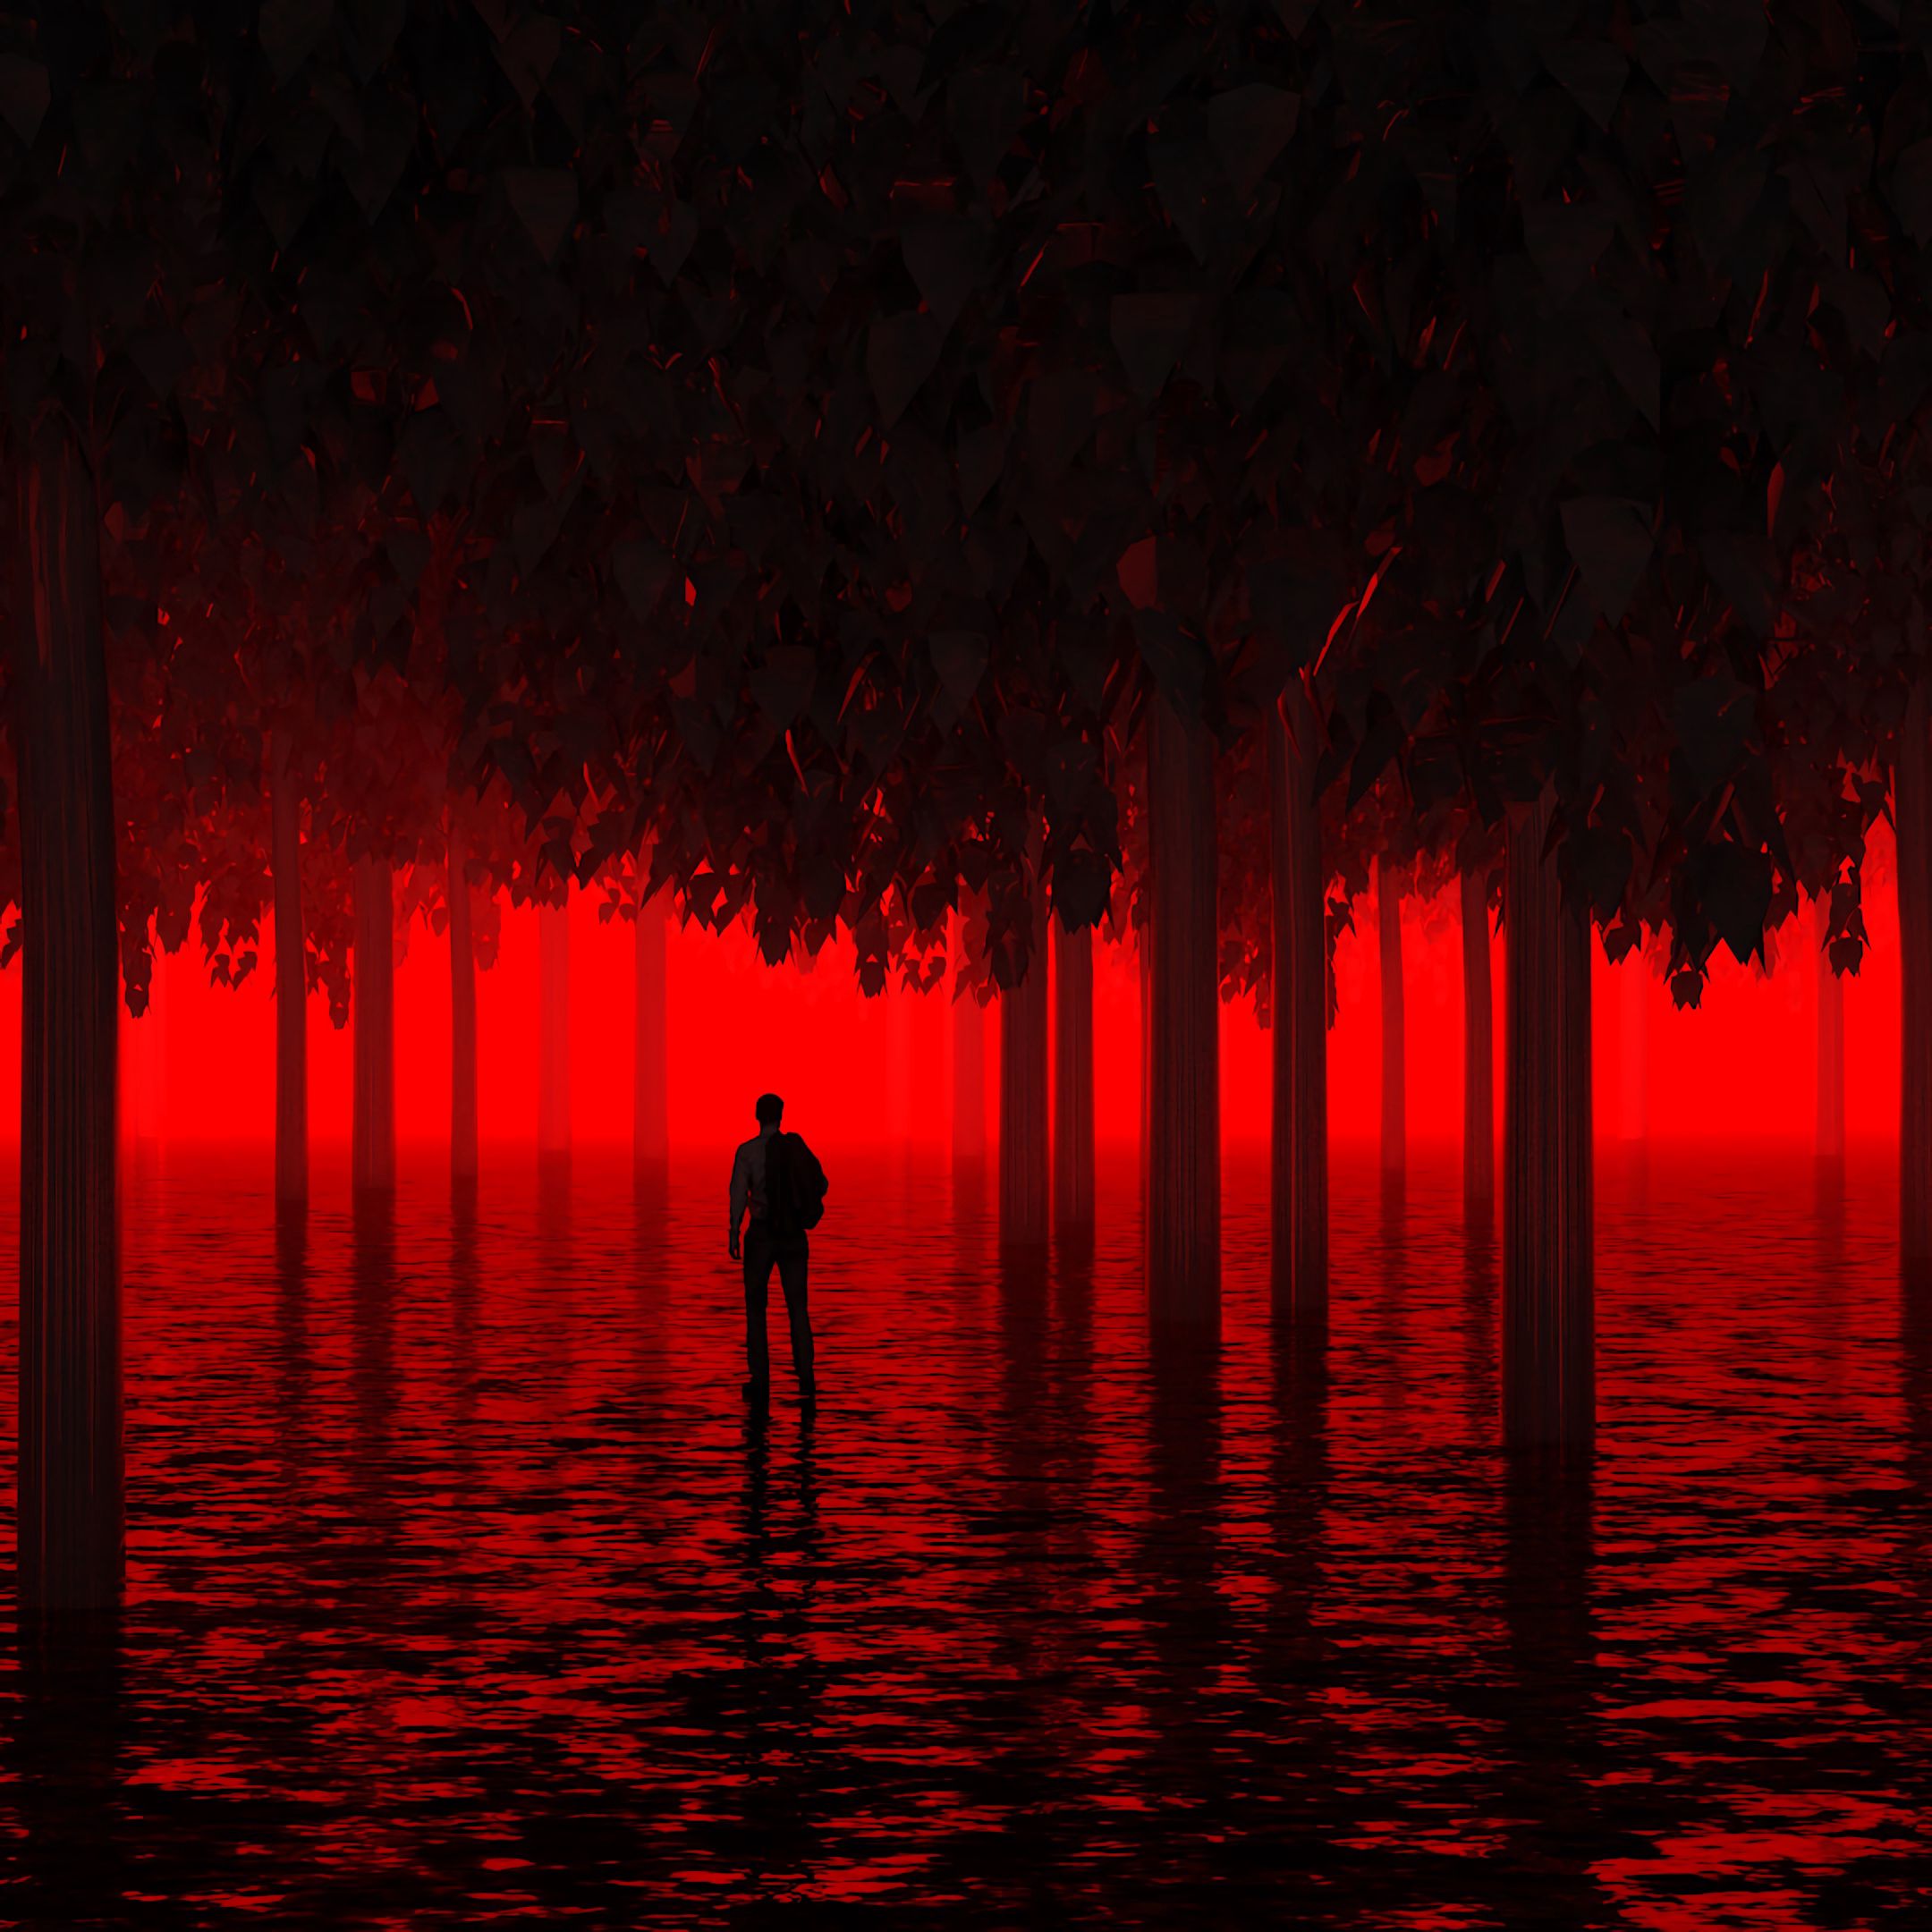 light, neon, human, dark, water, trees, red, shine, person, flooded, submerged wallpapers for tablet